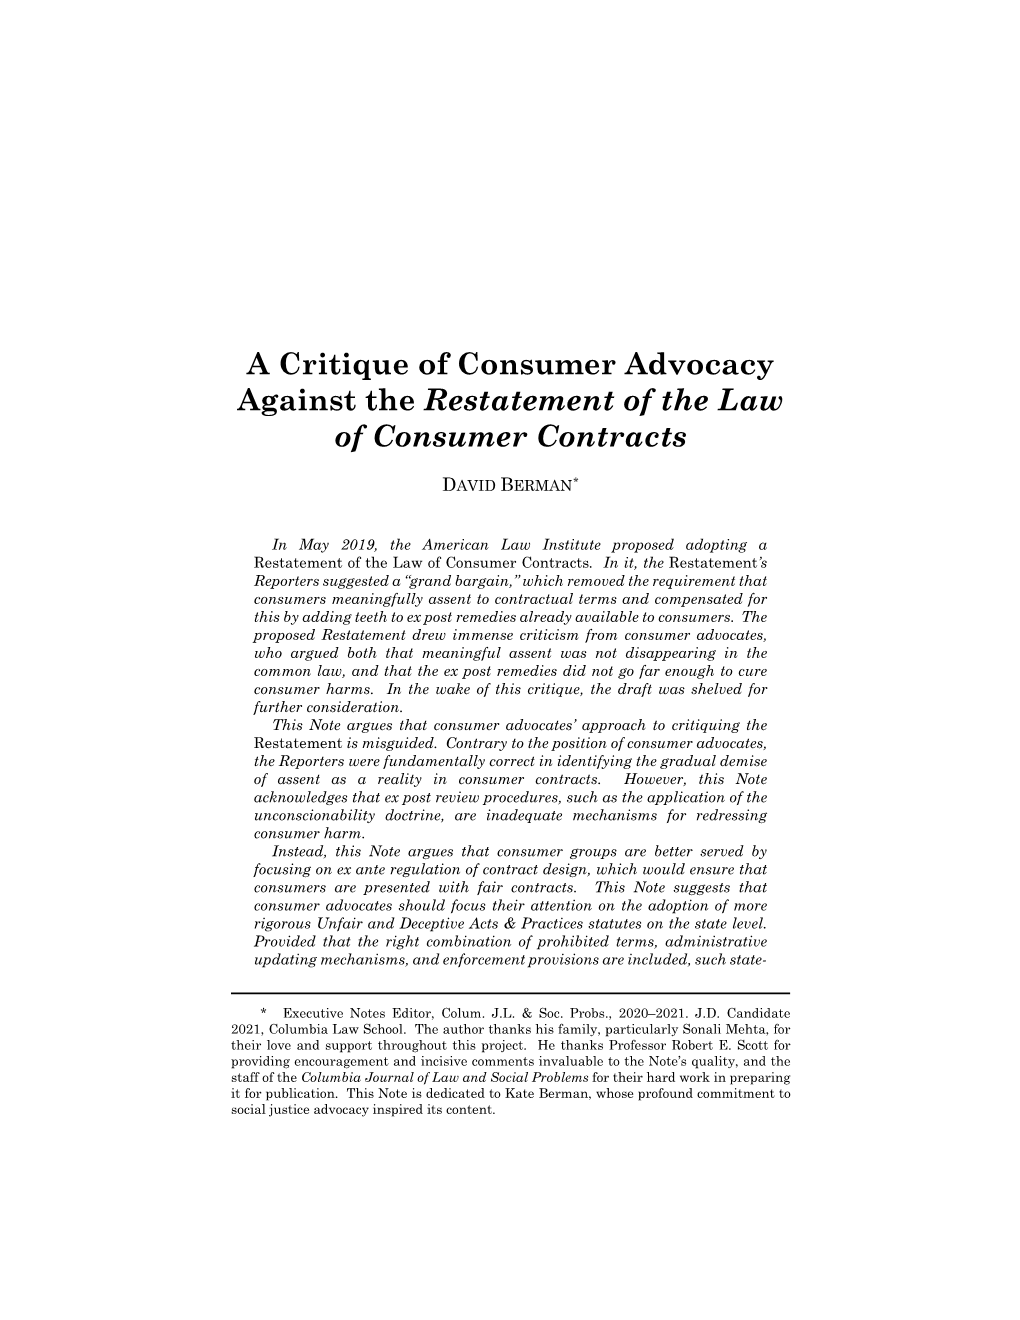 A Critique of Consumer Advocacy Against the Restatement of the Law of Consumer Contracts